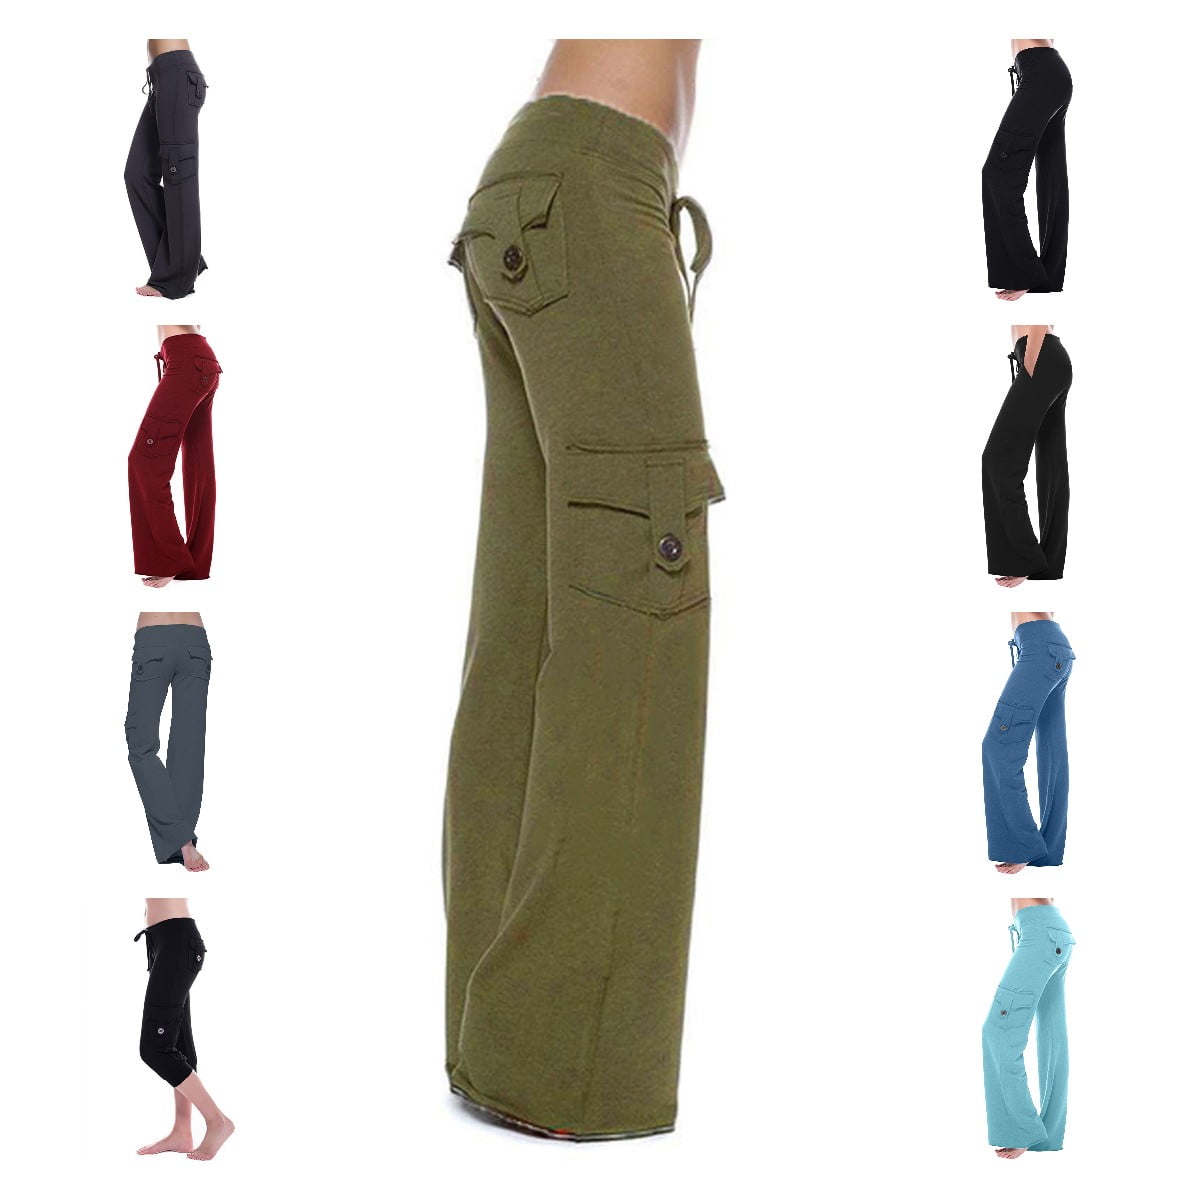 Wide Leg Yoga Pants,Casual Wide Leg Pants with Pockets - Cargo